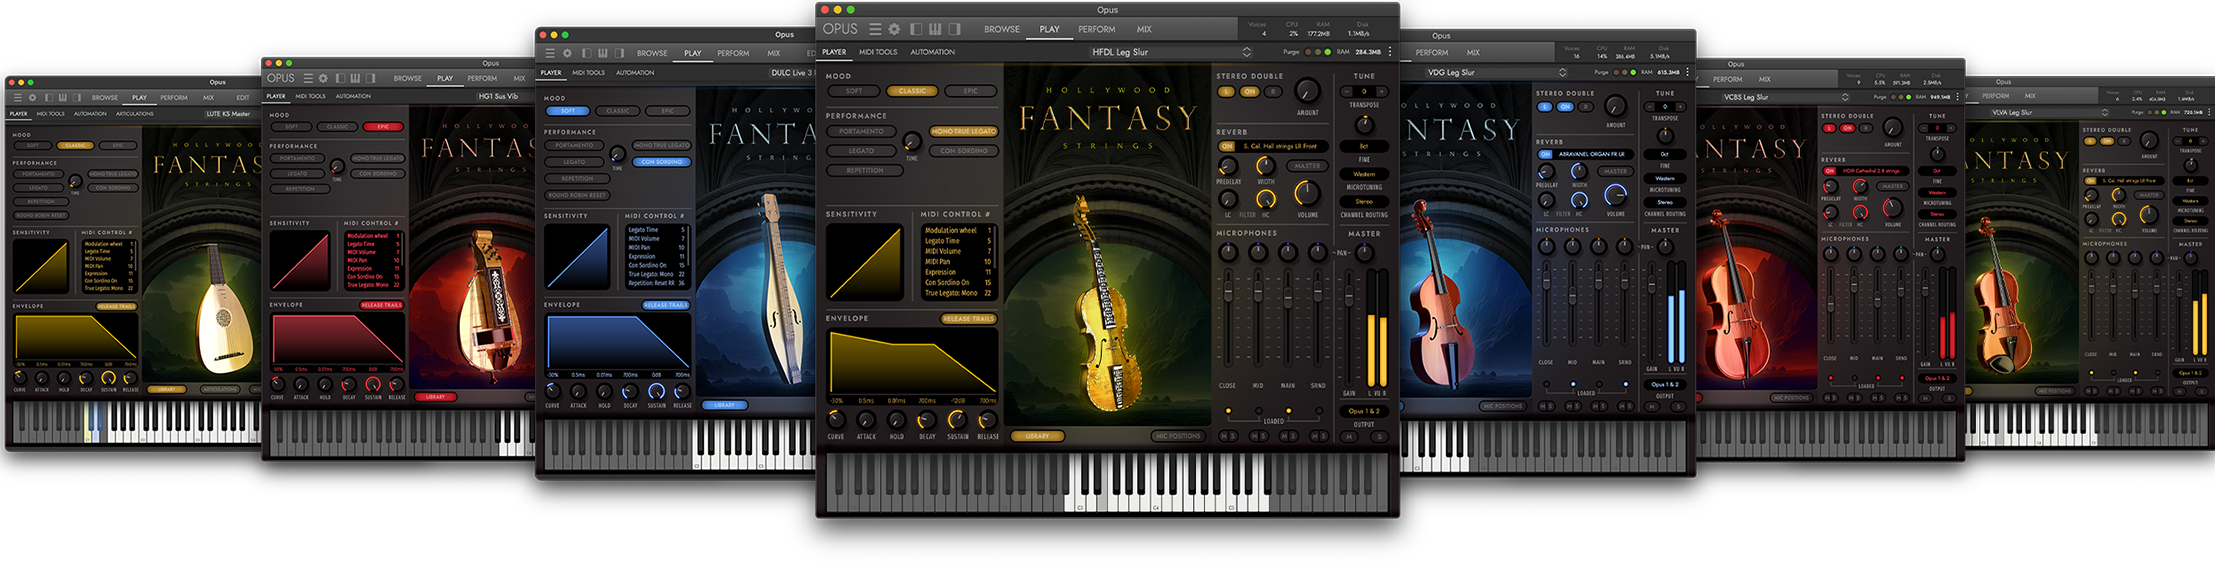 Hollywood Fantasy Orchestra Interfaces